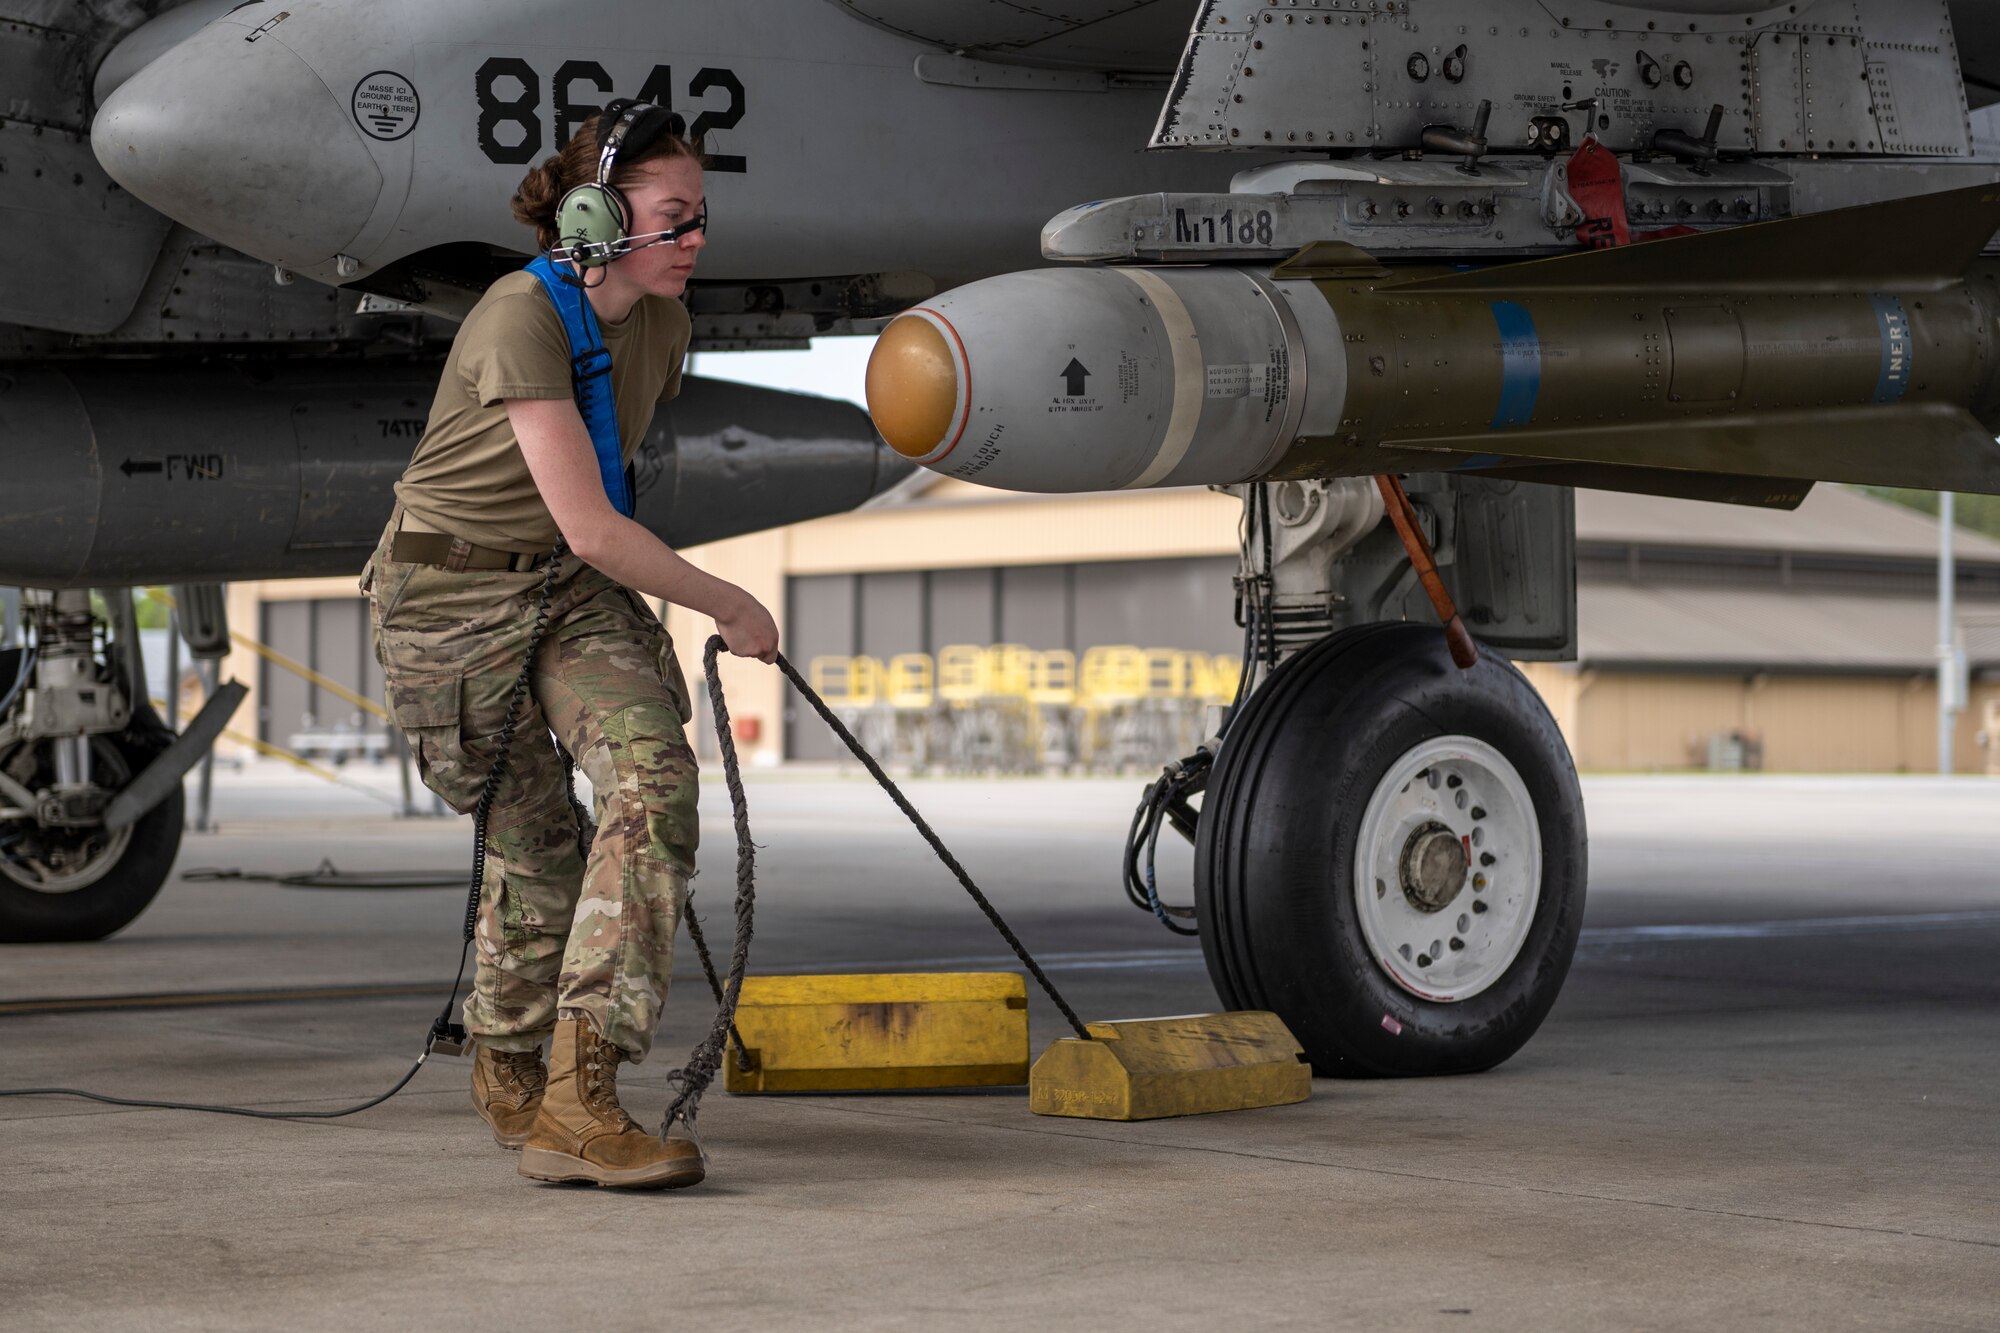 U.S. Air Force Airman Gabrielle Shipley, 74th Fighter Generation Squadron crew chief, removes chocks from an A-10C Thunderbolt II during Exercise Ready Tiger 24-1 from Moody Air Force Base, Georgia, April 10, 2024. Chocking an aircraft is an important safety precaution that helps prevent the aircraft from moving while it is parked. During Ready Tiger 24-1, the 23rd Wing will be evaluated on the integration of Air Force Force Generation principles such as Agile Combat Employment, integrated combat turns, forward aerial refueling points, multi-capable Airmen, and combat search and rescue capabilities. (U.S. Air Force photo by Senior Airman Deanna Muir)